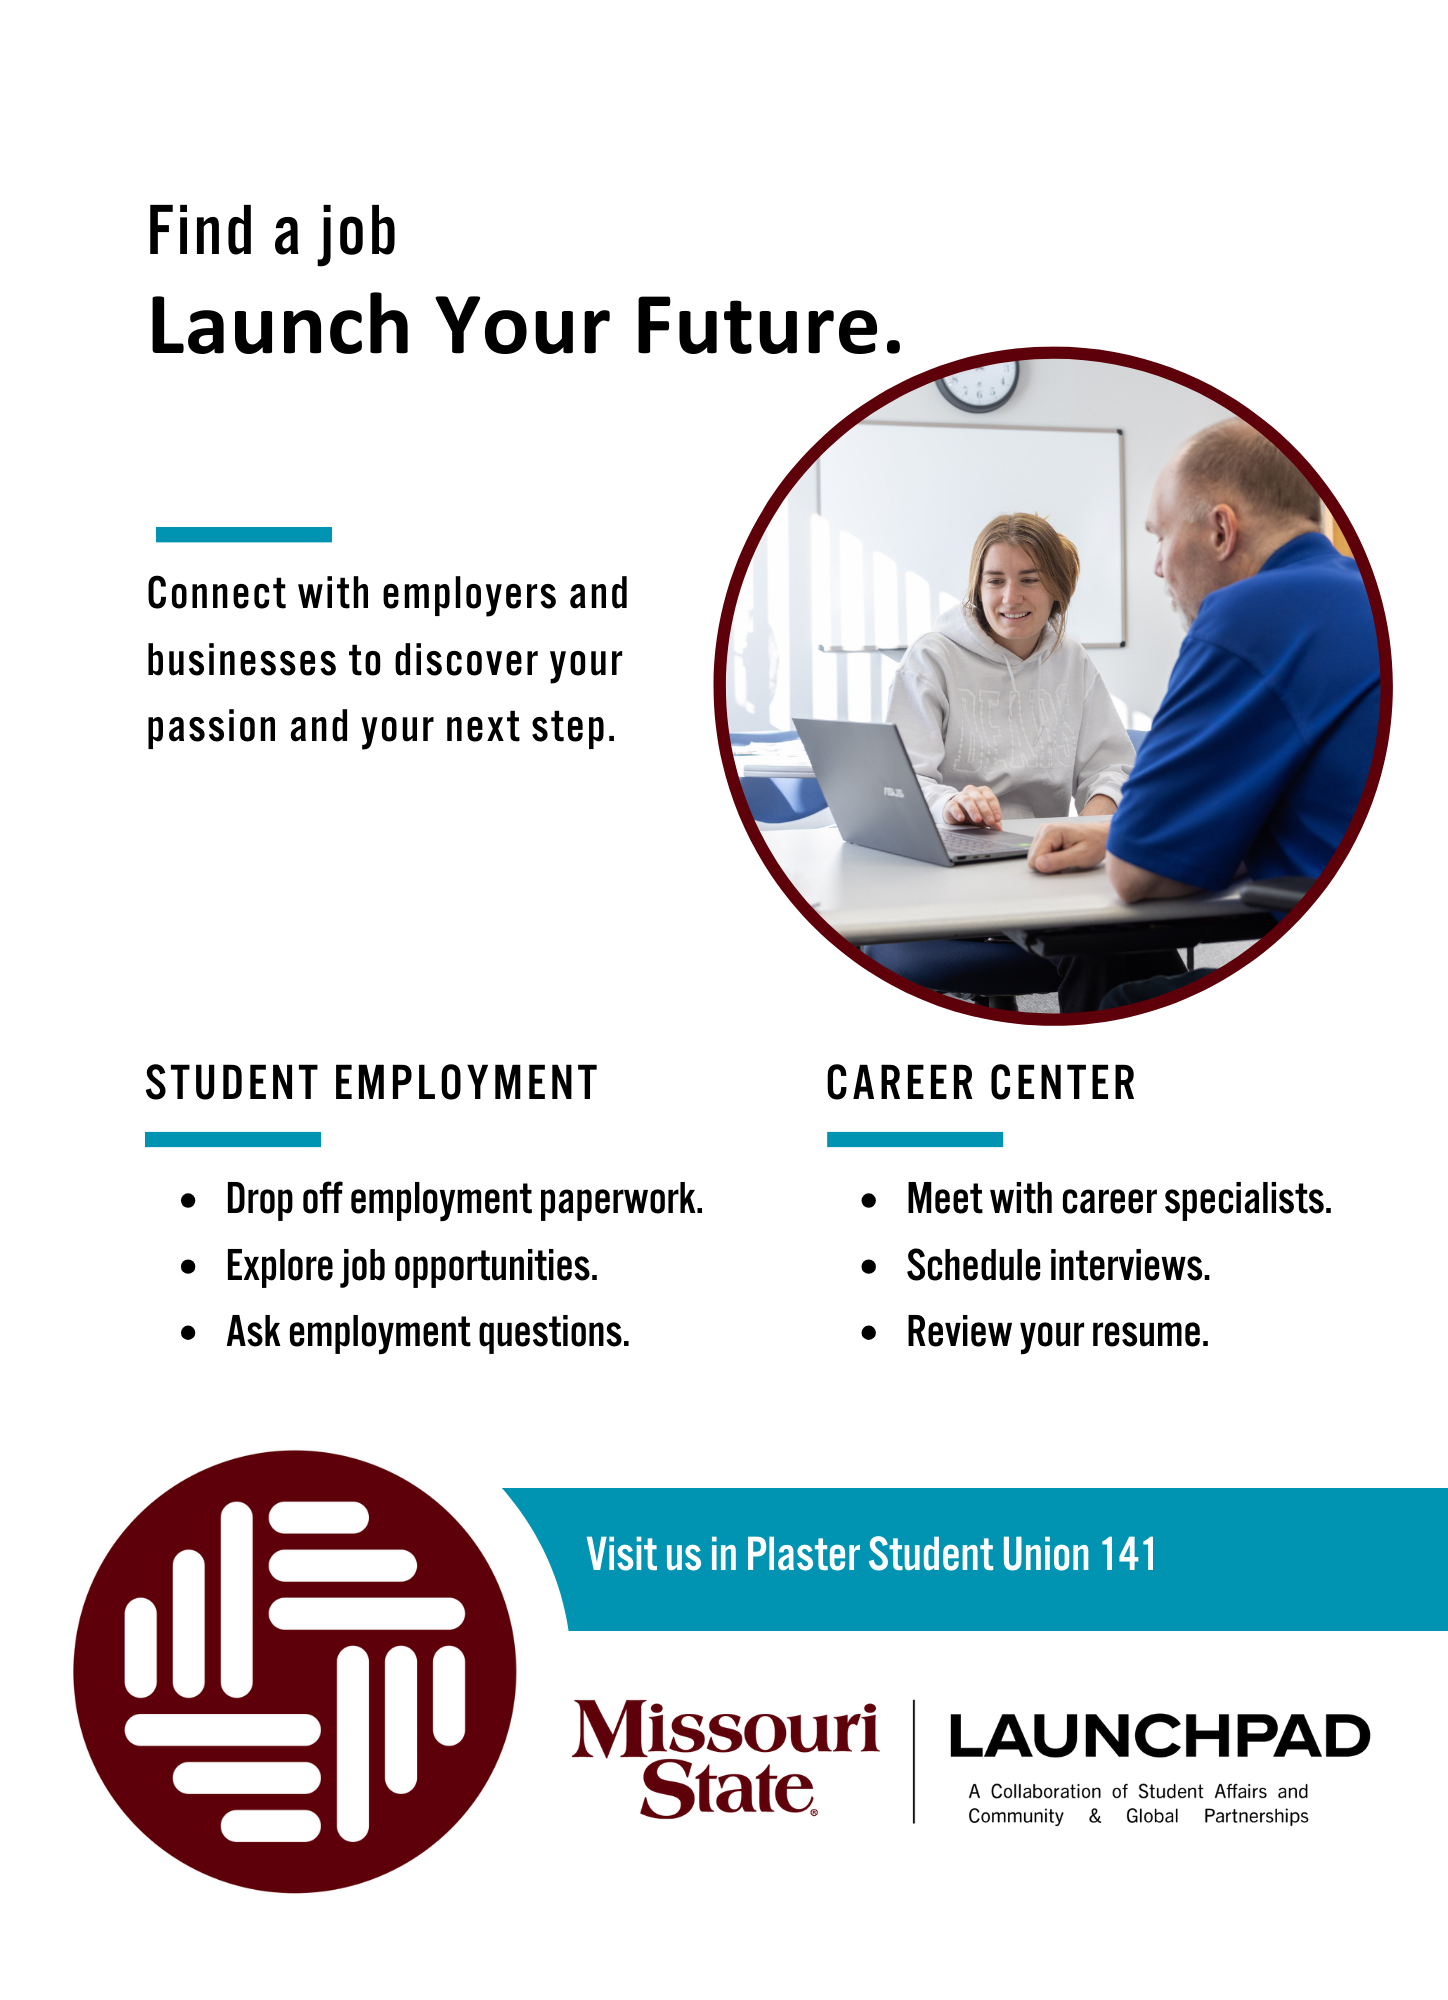 Launch your future at this new collaborative space betweeen student employment and career center